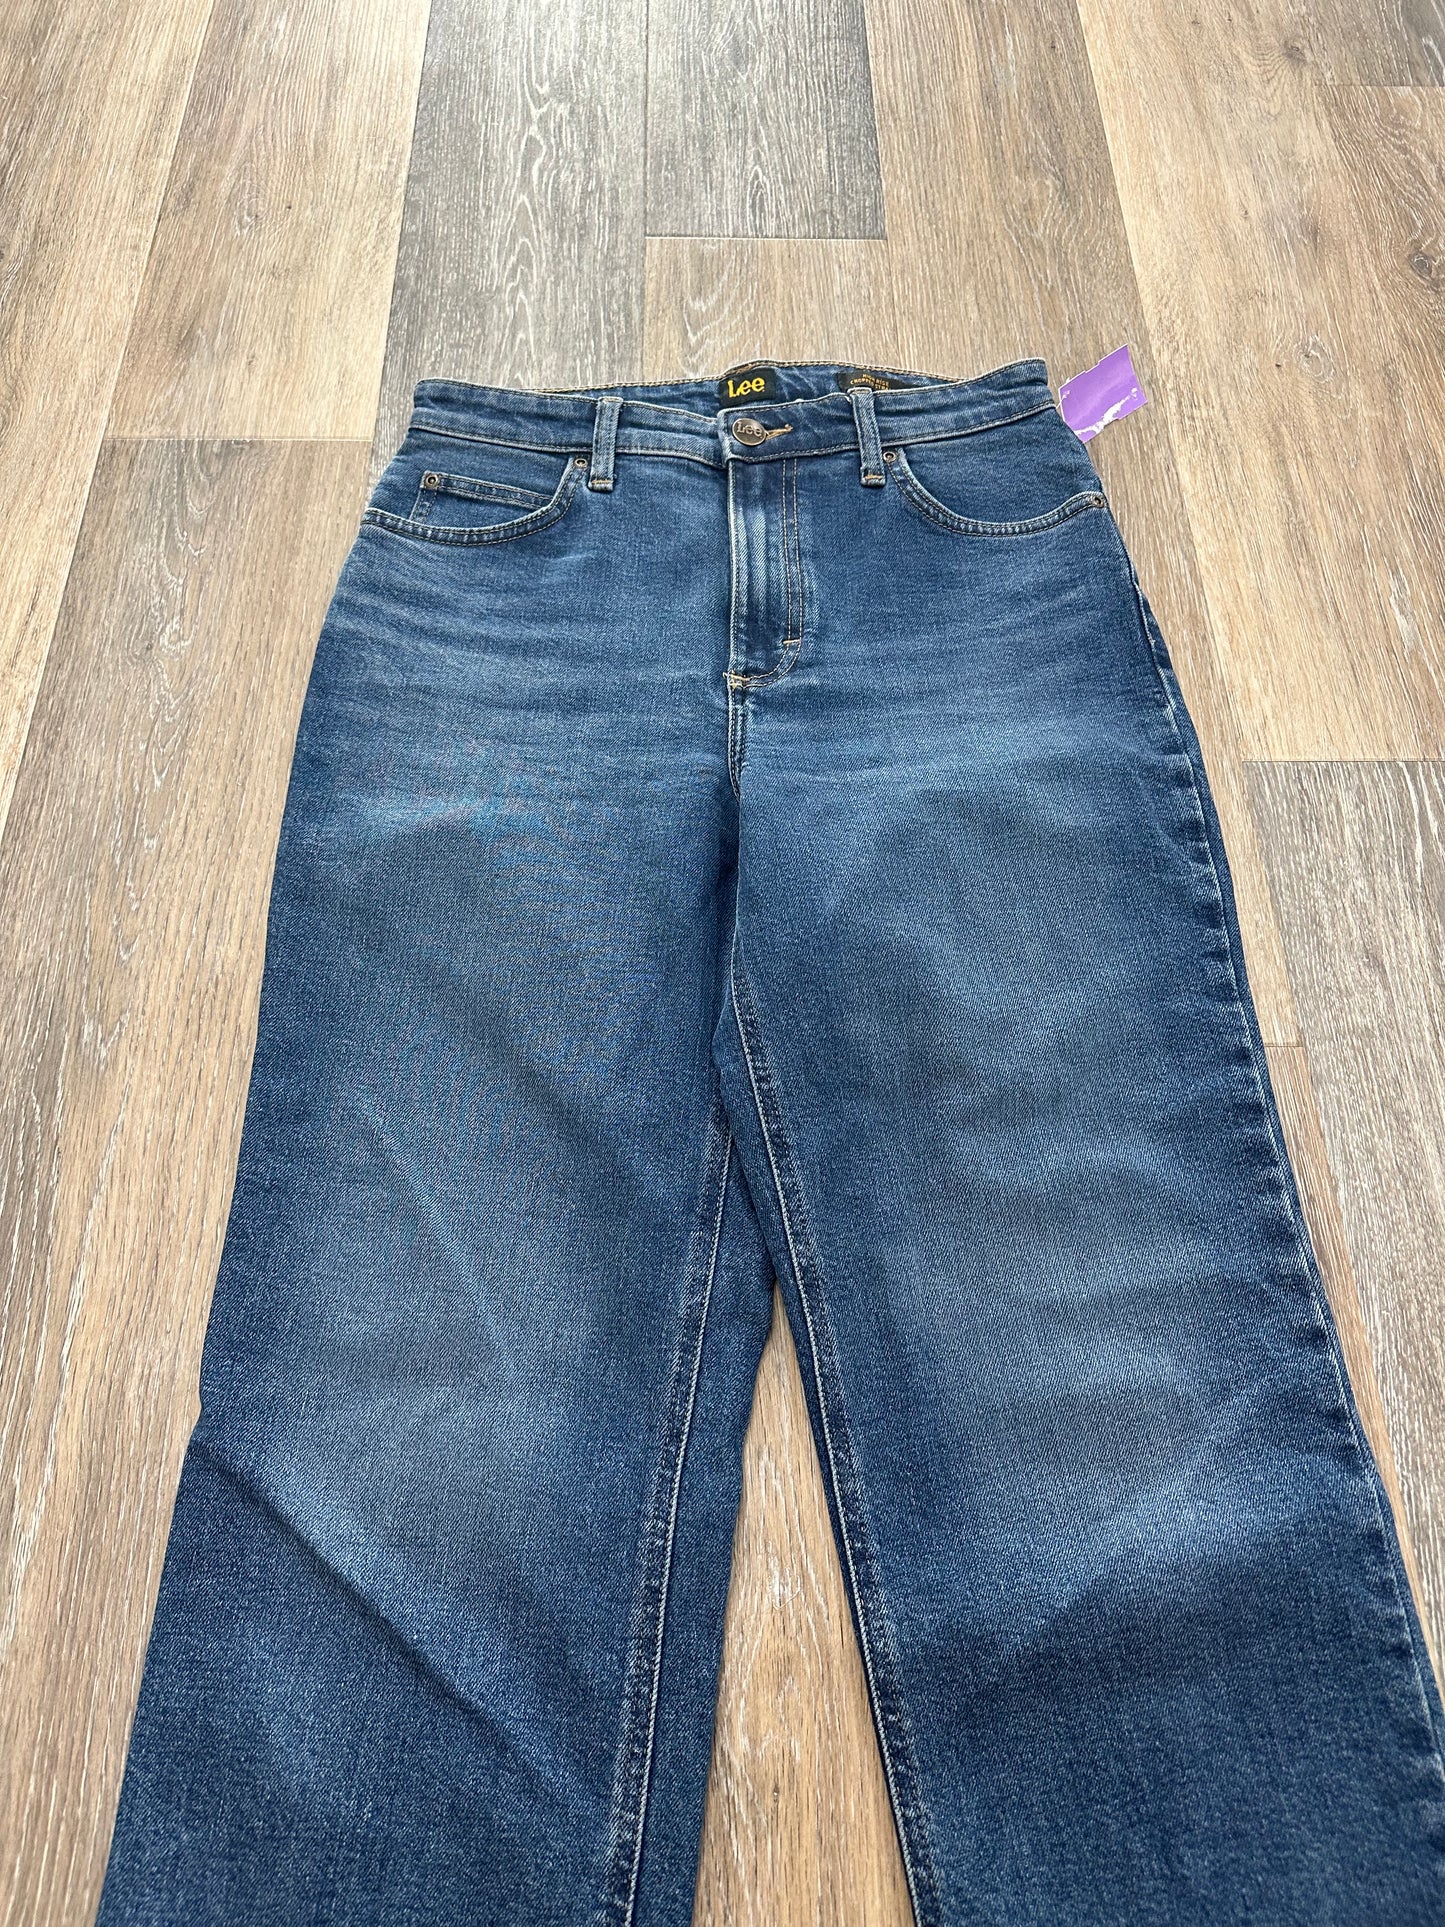 Jeans Straight By Lee  Size: 6